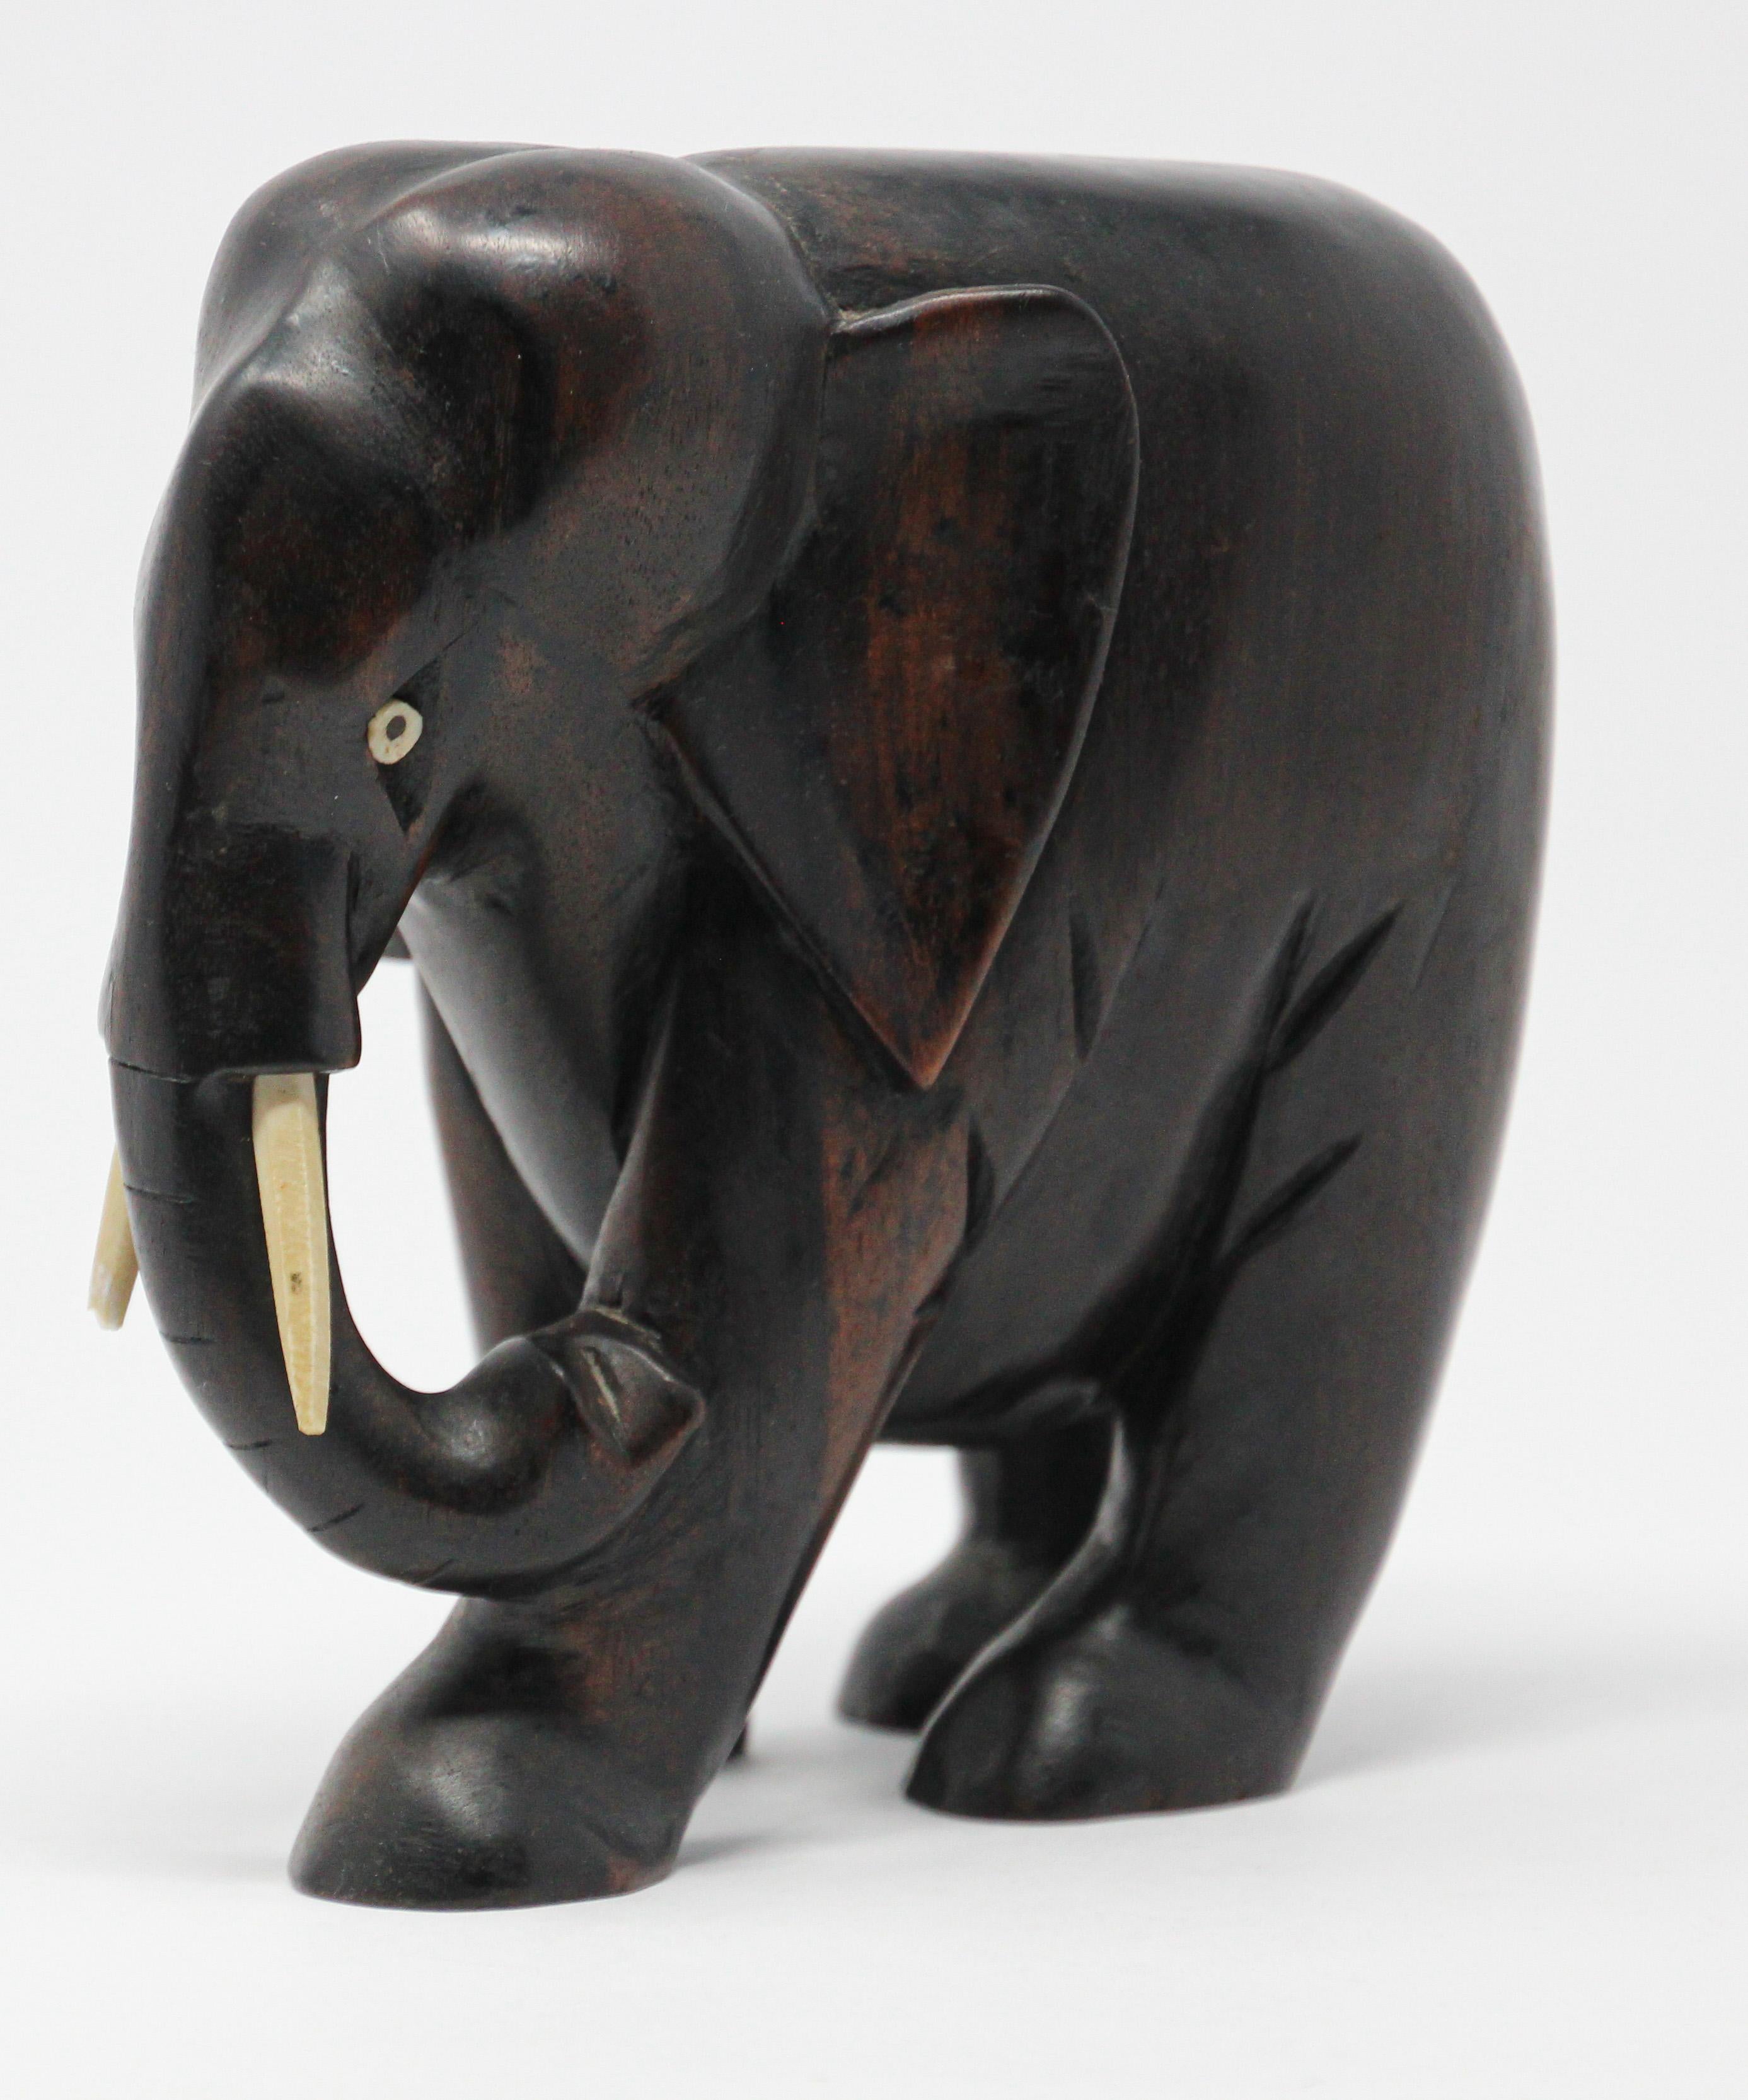 Hand carved wood ebony African elephant.
Handcrafted in Africa.
One of the tusk is damaged